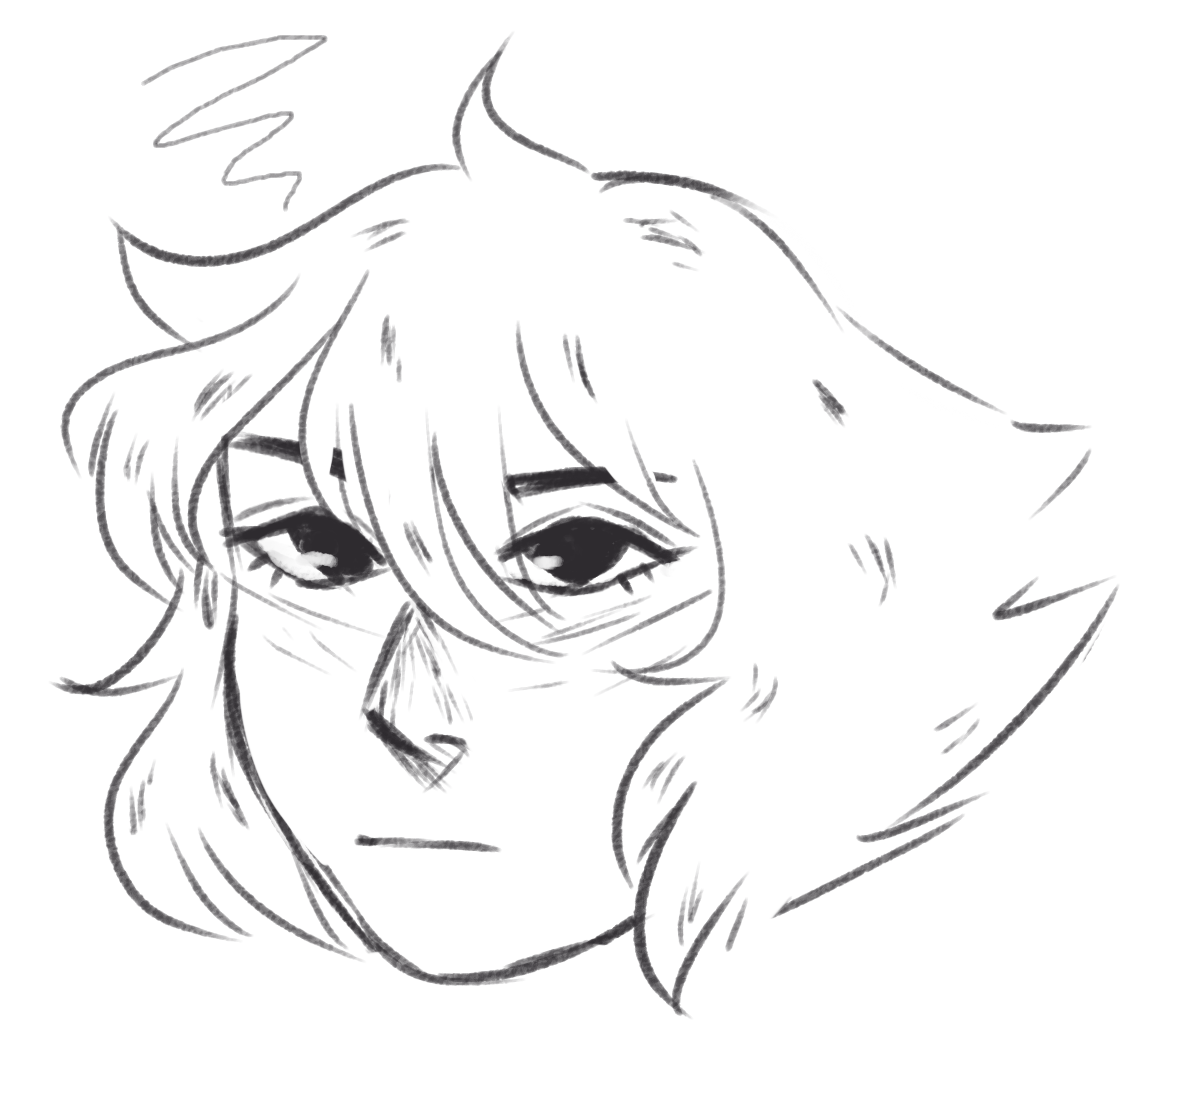 Have this annoyed lapis